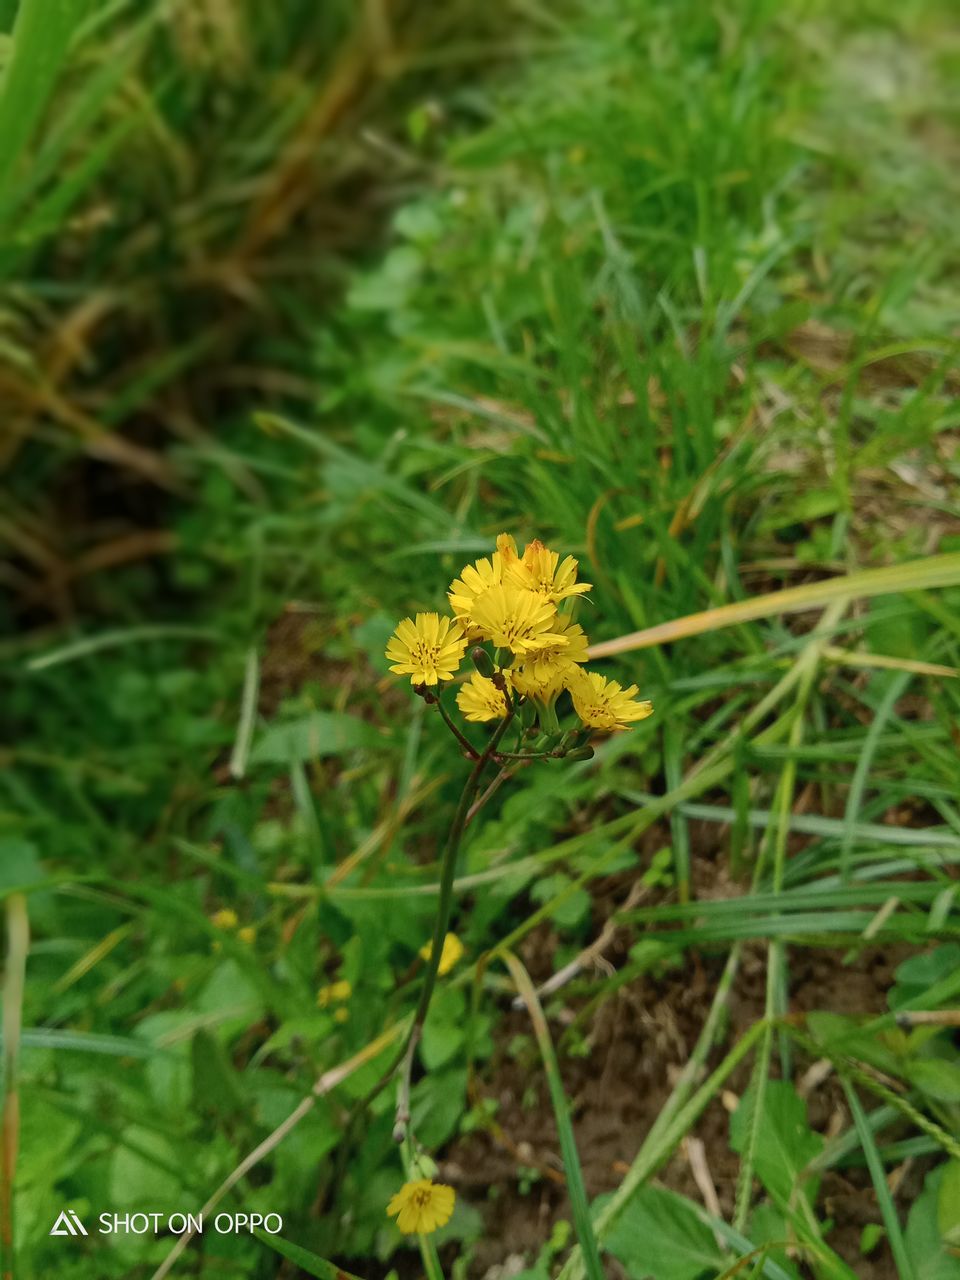 plant, flower, flowering plant, beauty in nature, growth, nature, green, freshness, yellow, prairie, fragility, close-up, grass, day, flower head, no people, field, focus on foreground, land, inflorescence, outdoors, meadow, petal, leaf, flatweed, wildflower, plant part, high angle view, animal wildlife, botany, lawn